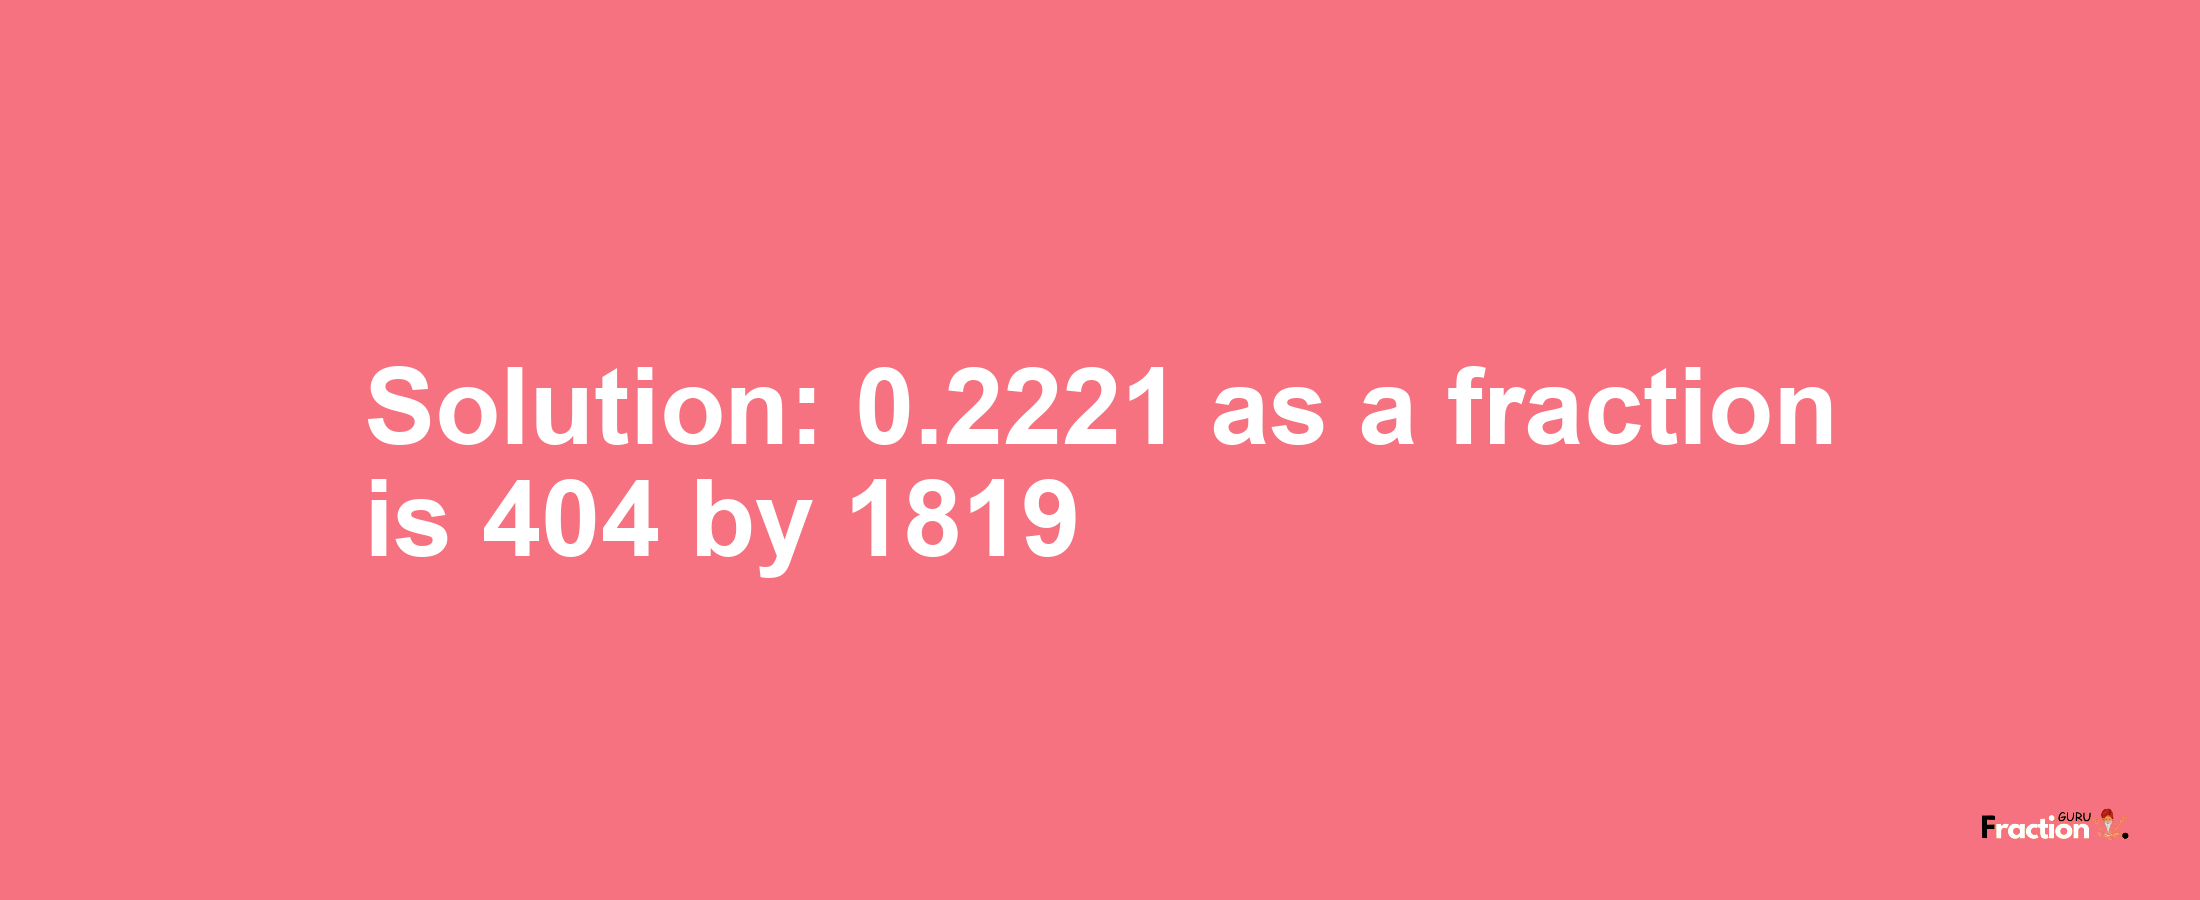 Solution:0.2221 as a fraction is 404/1819